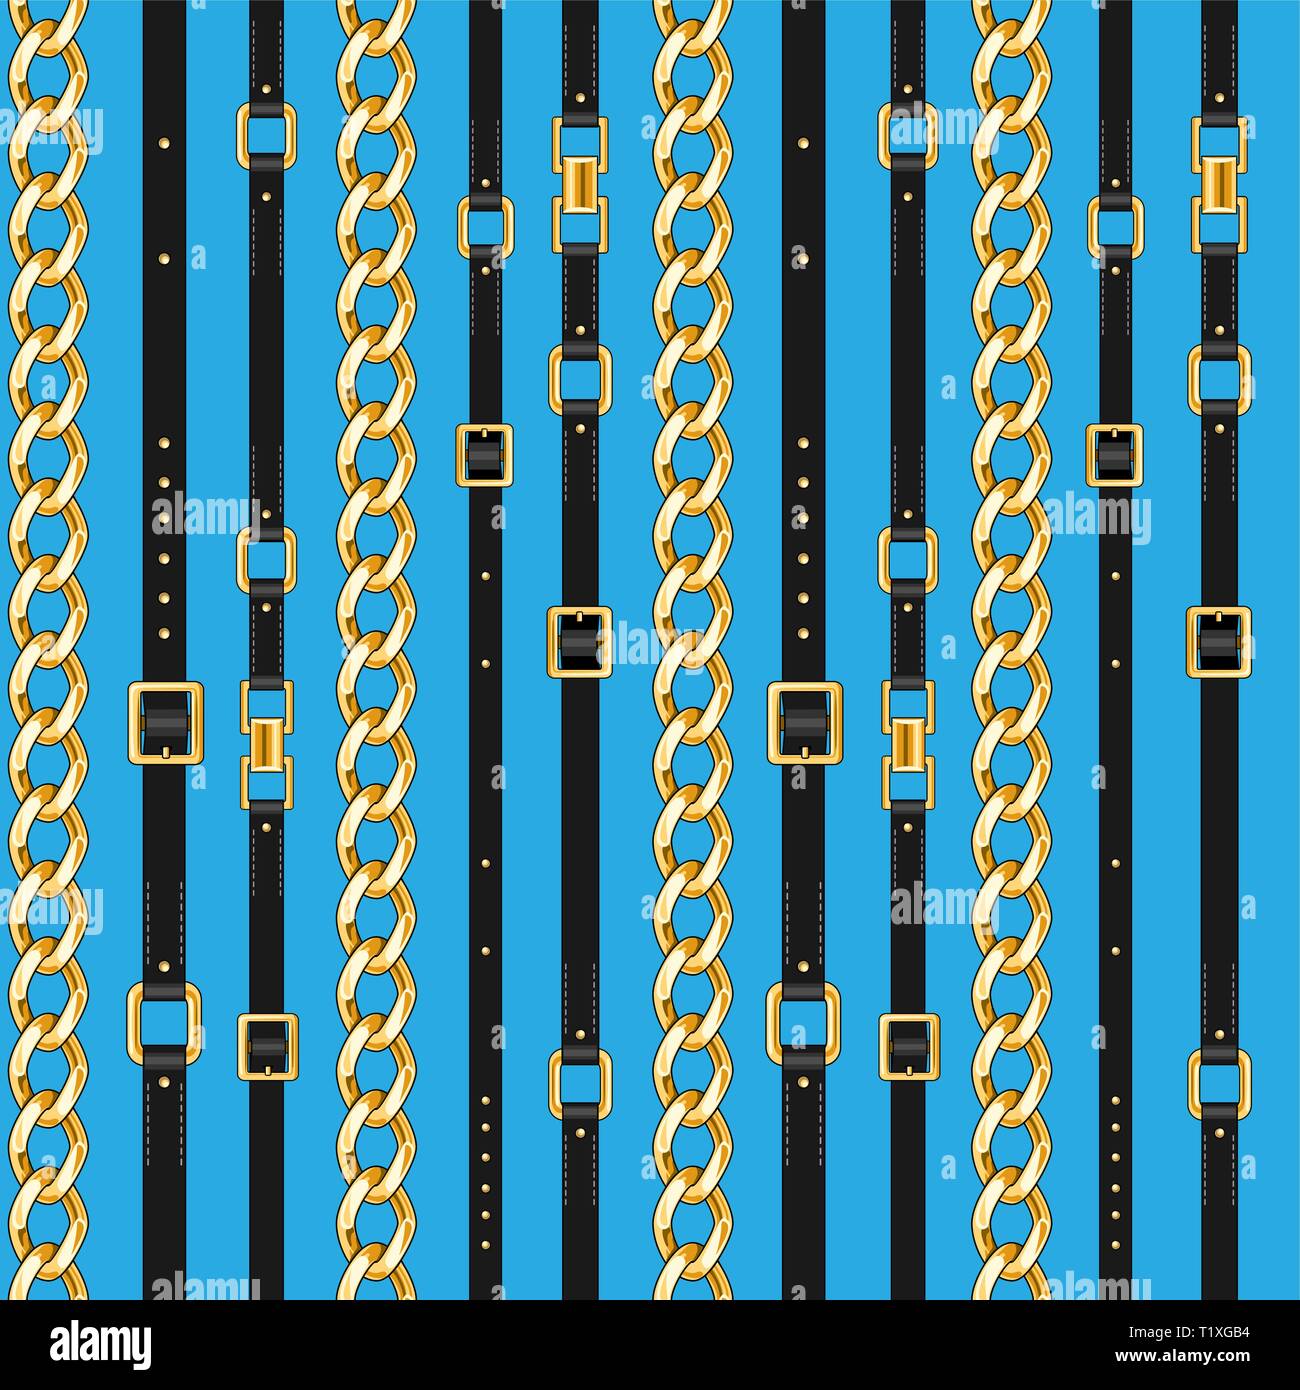 Abctract blue seamless pattern with belts and chain for fabric. Trendy repeating print. Stock Vector